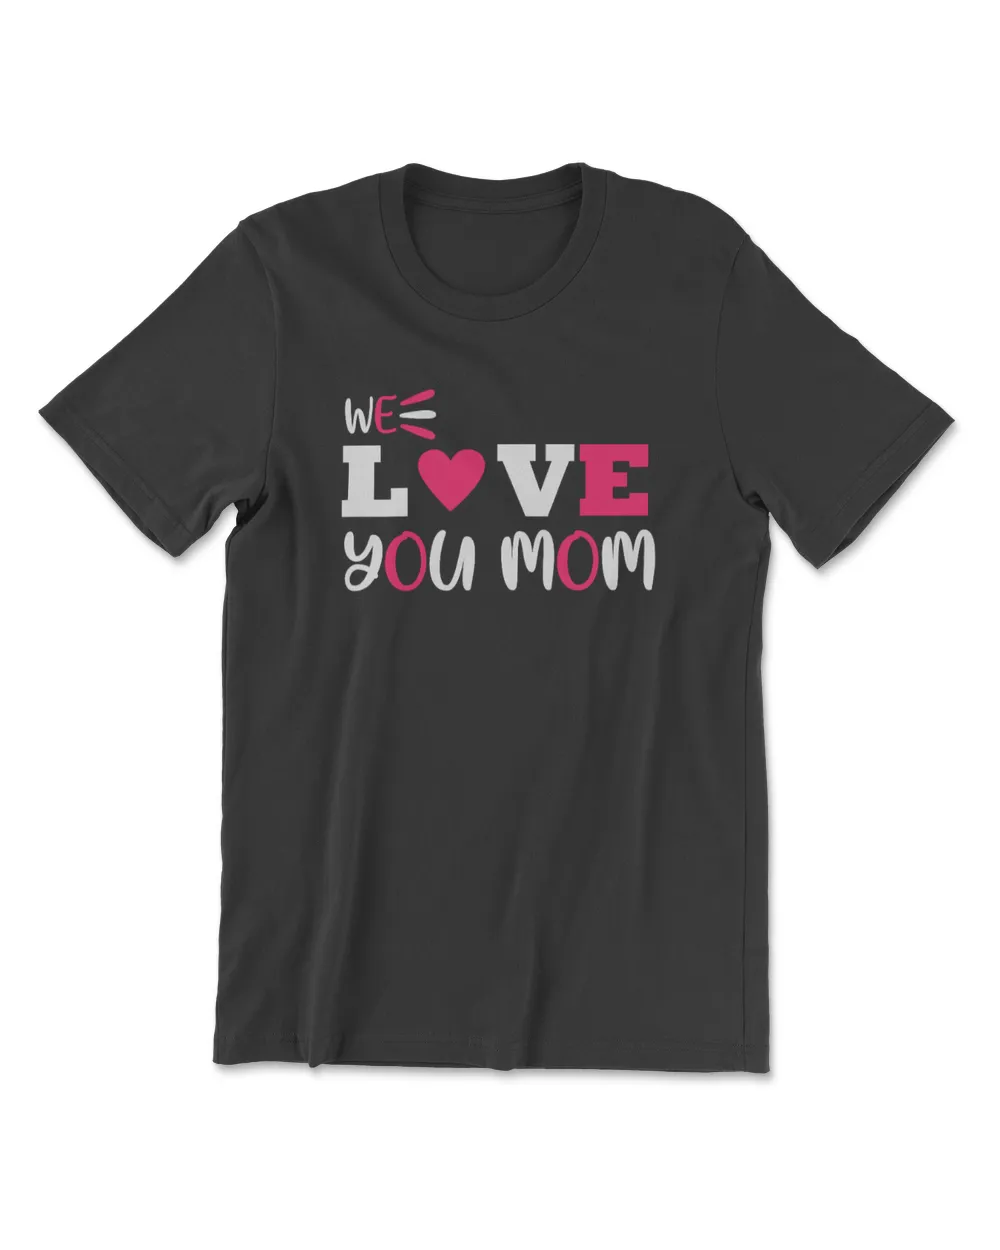 We love you mom t shirt